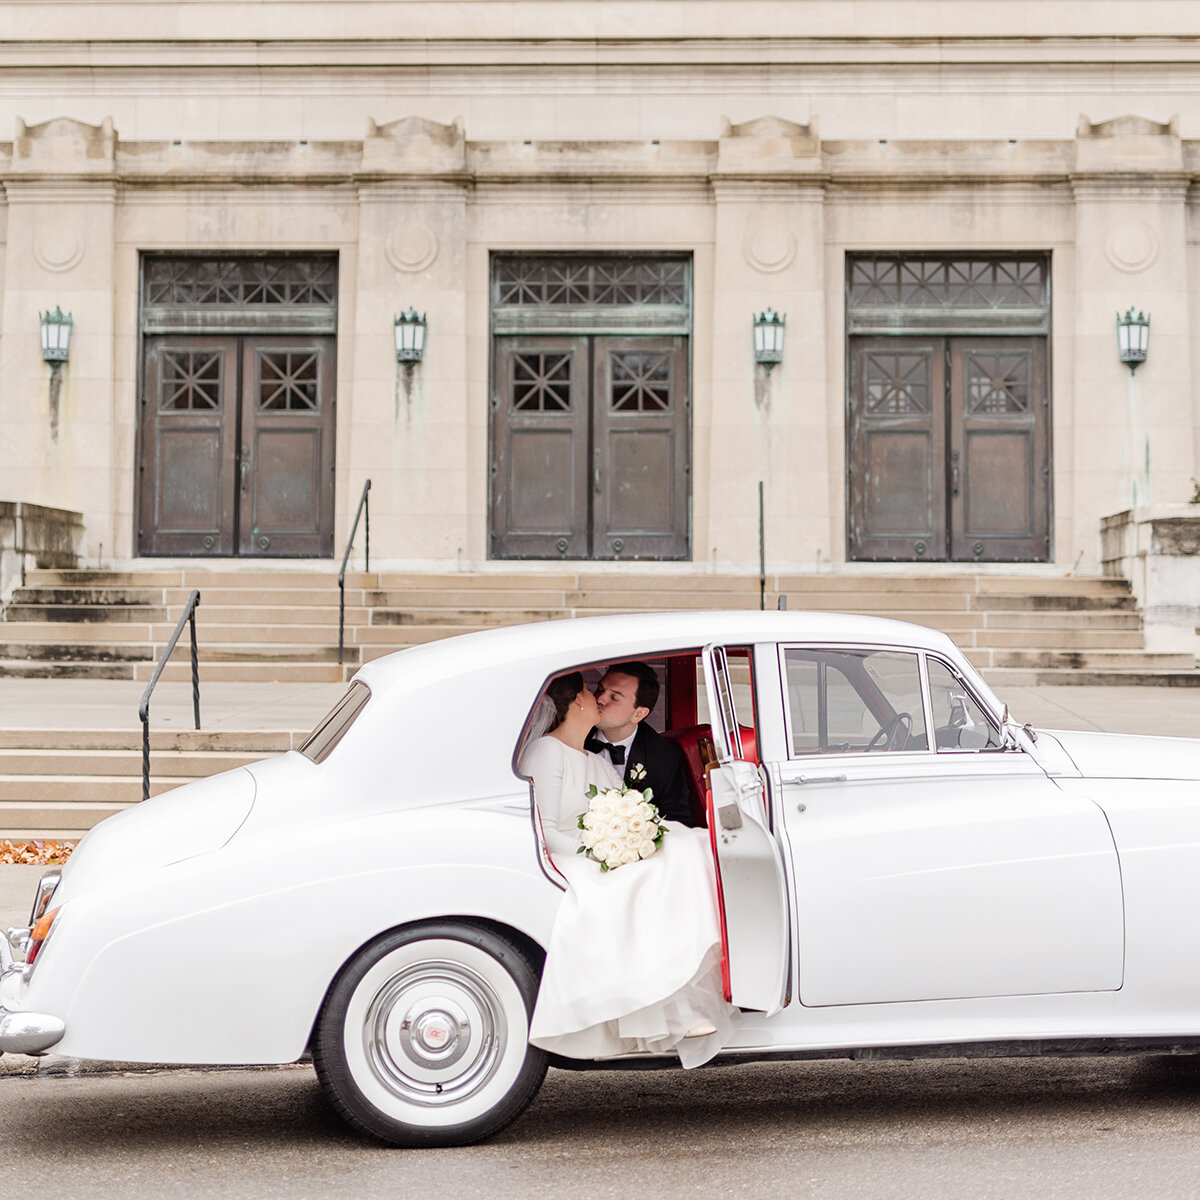 We're rolling into a holiday week like these two love birds.💕

What big plans do you have this week?  We're looking forward to spending some much needed time with friends and family.

Images: @stephanielynnkase 
Venue: @daytonmasoniccenter 

#dayton